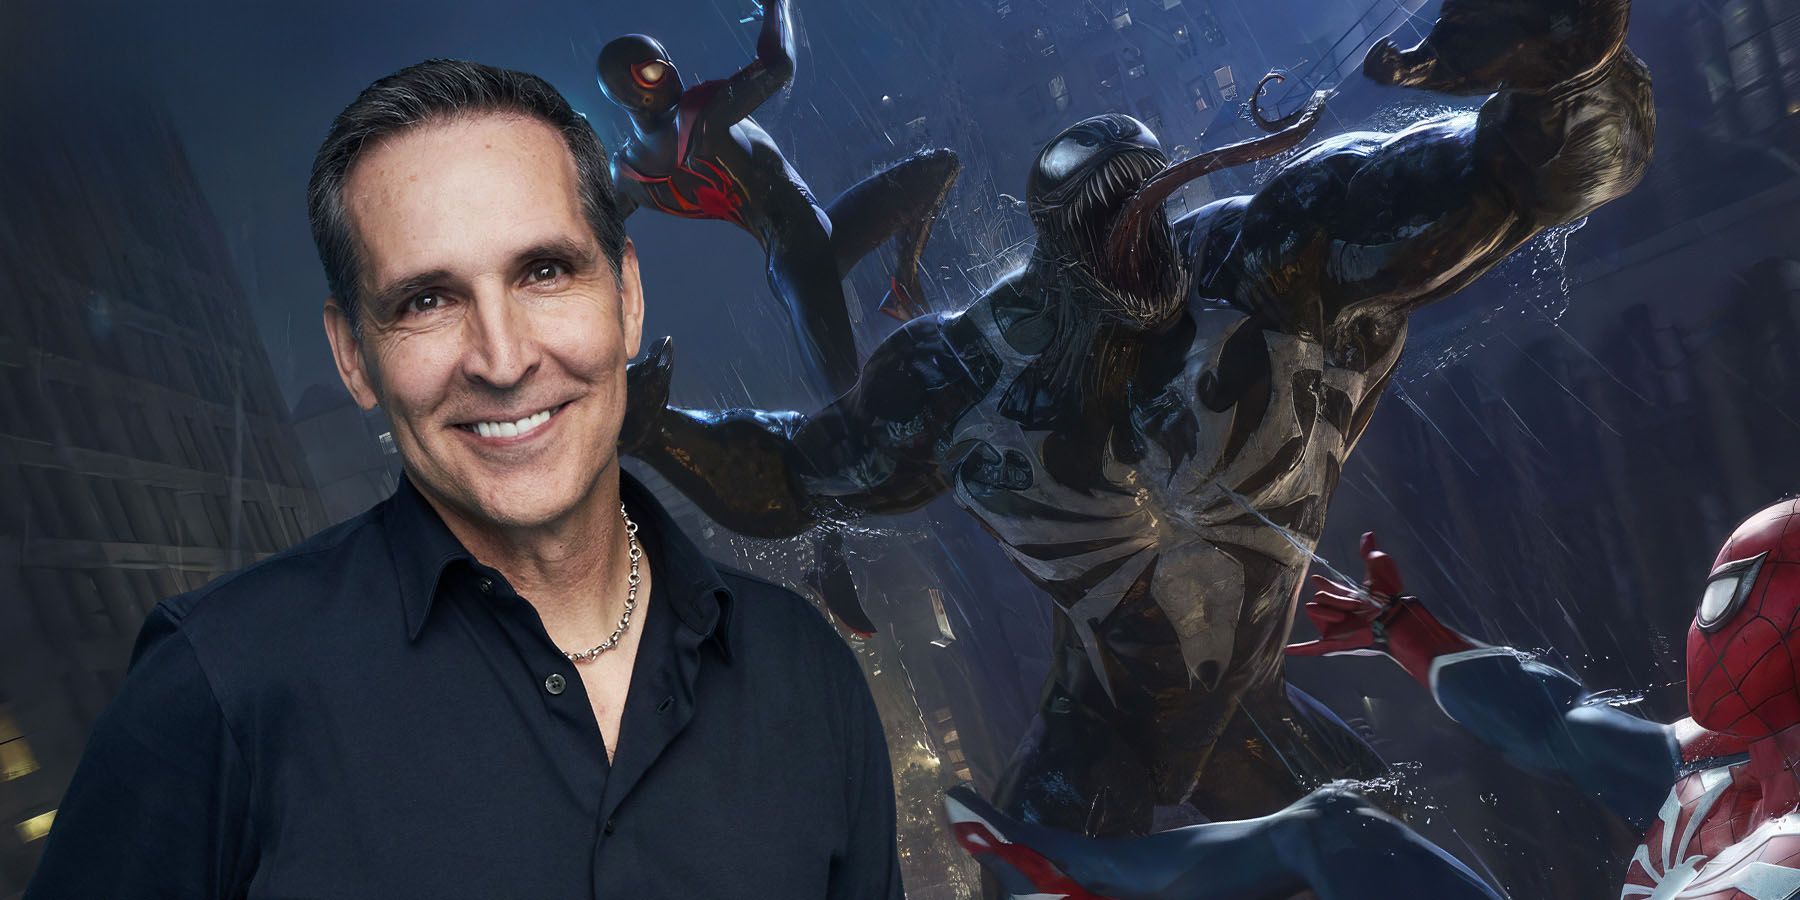 An image of Todd McFarlane inserted into concept art of Venom fighting Peter Parker and Miles Morales in Marvel's Spider-Man 2.